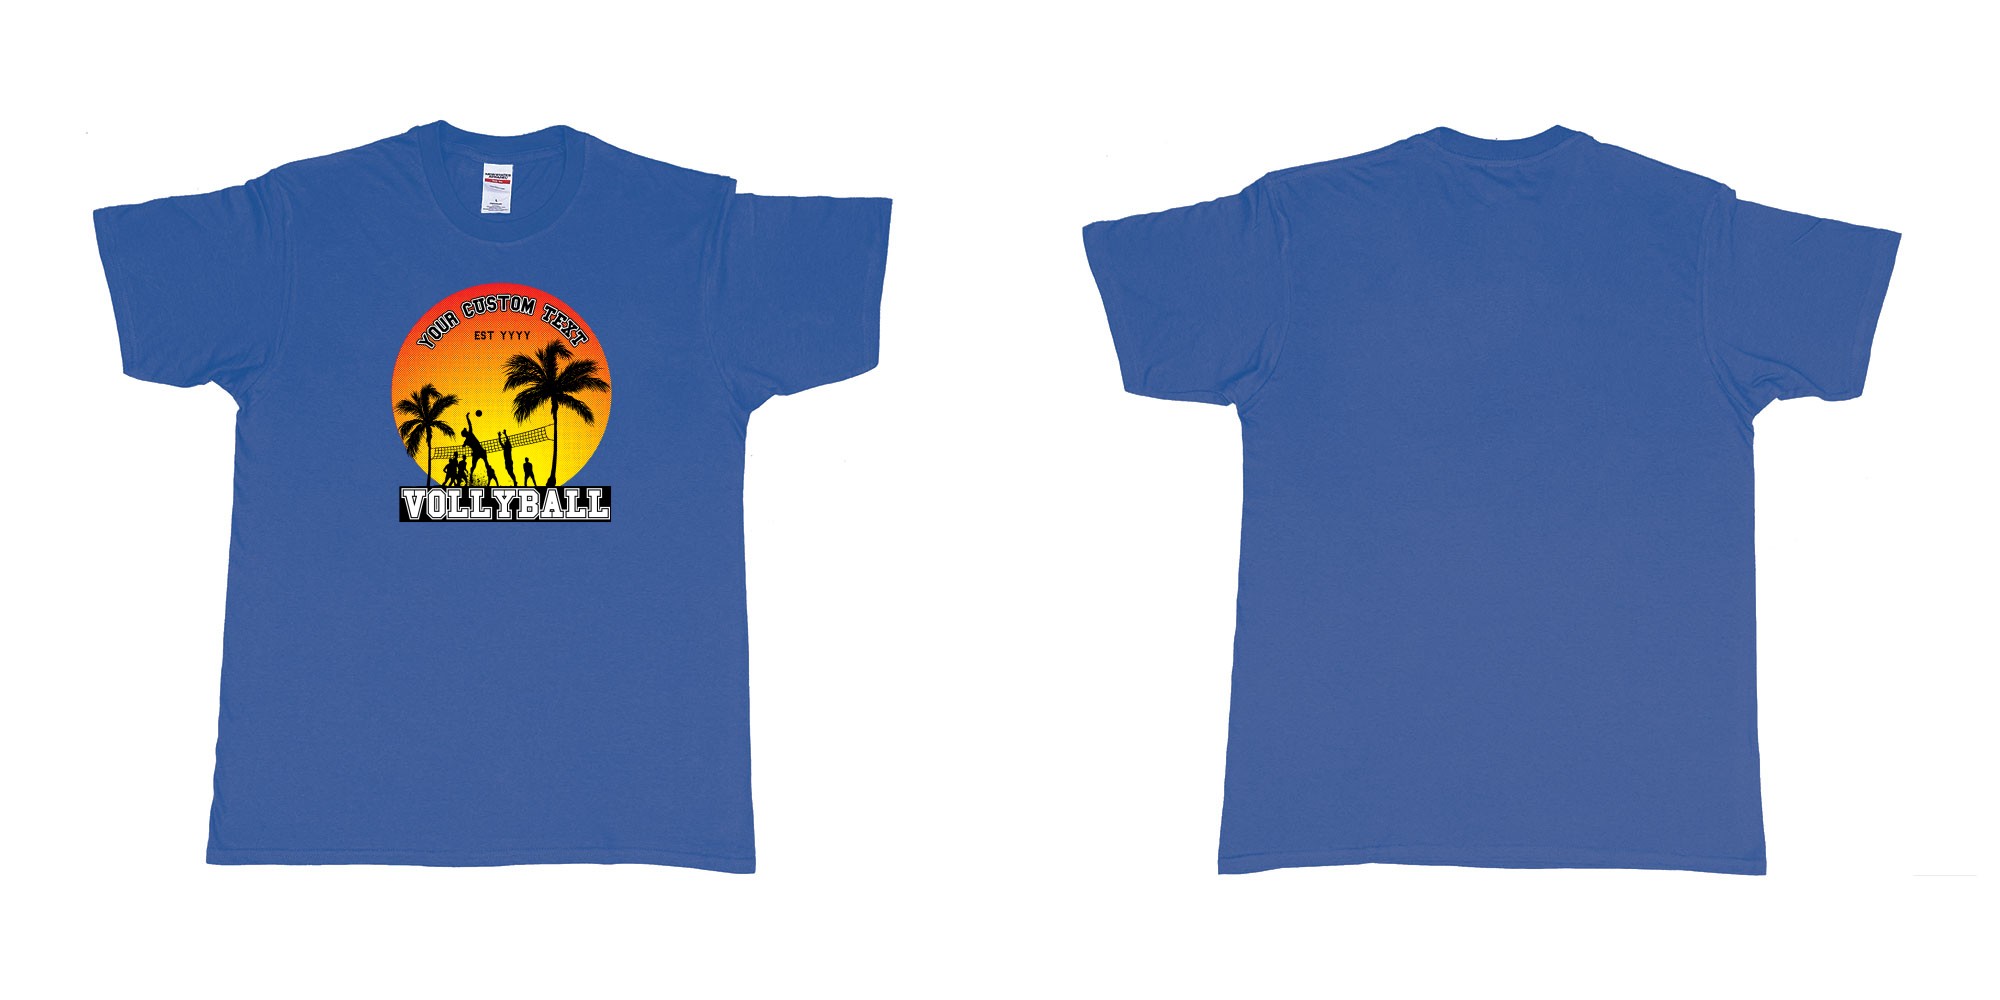 Custom tshirt design sunset volleyball t shirt with a sunset view and your custom print text and year in fabric color royal-blue choice your own text made in Bali by The Pirate Way